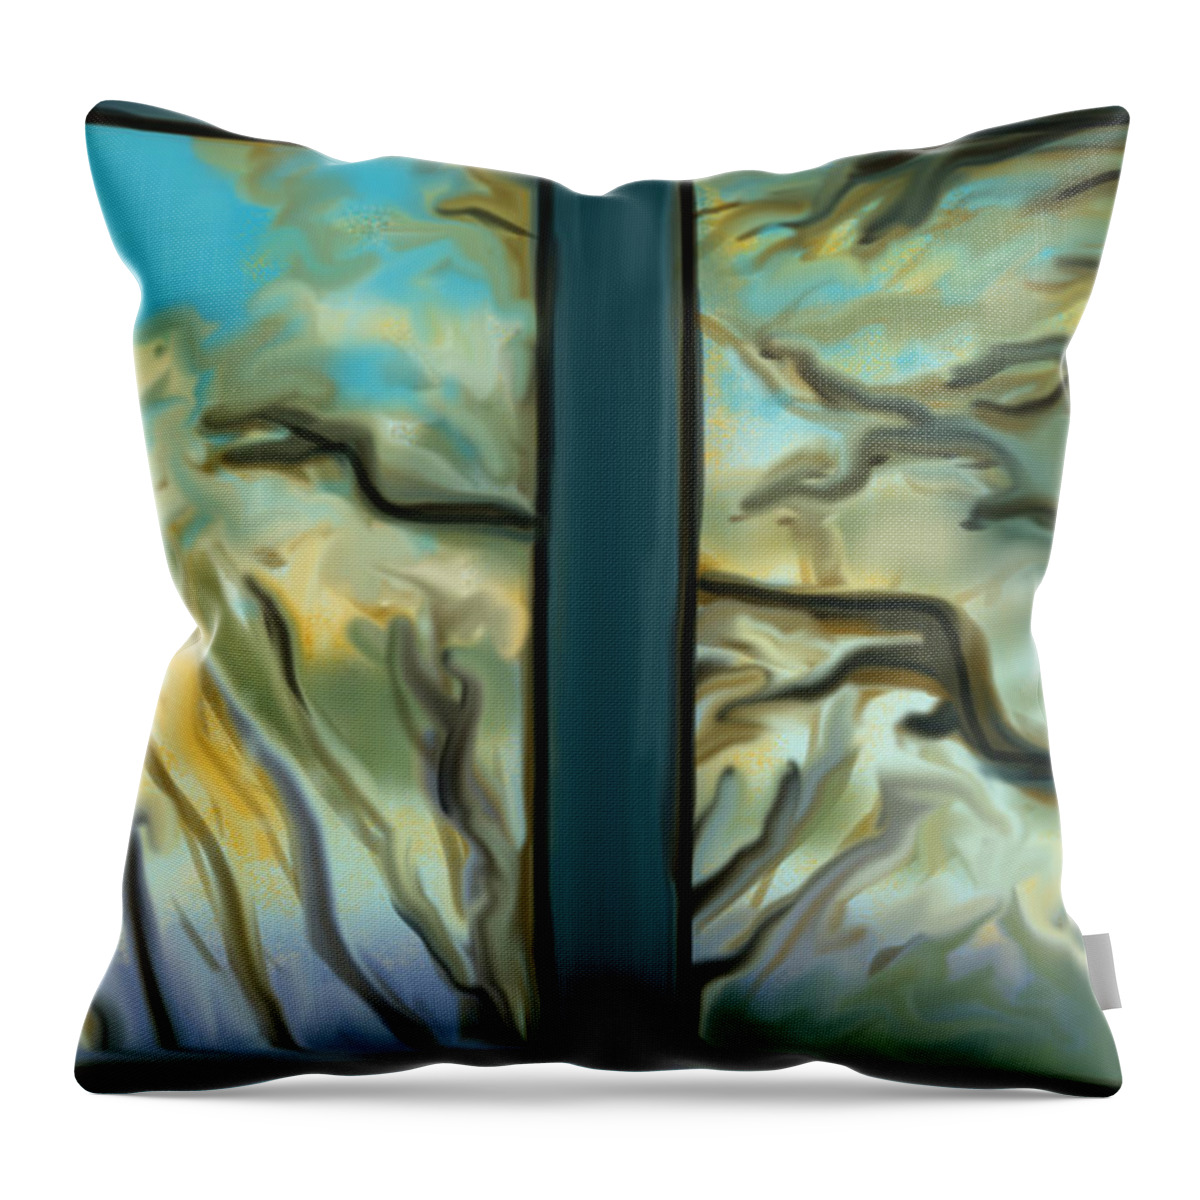 Magic Wand Throw Pillow featuring the painting Magic Wand by Jean Pacheco Ravinski